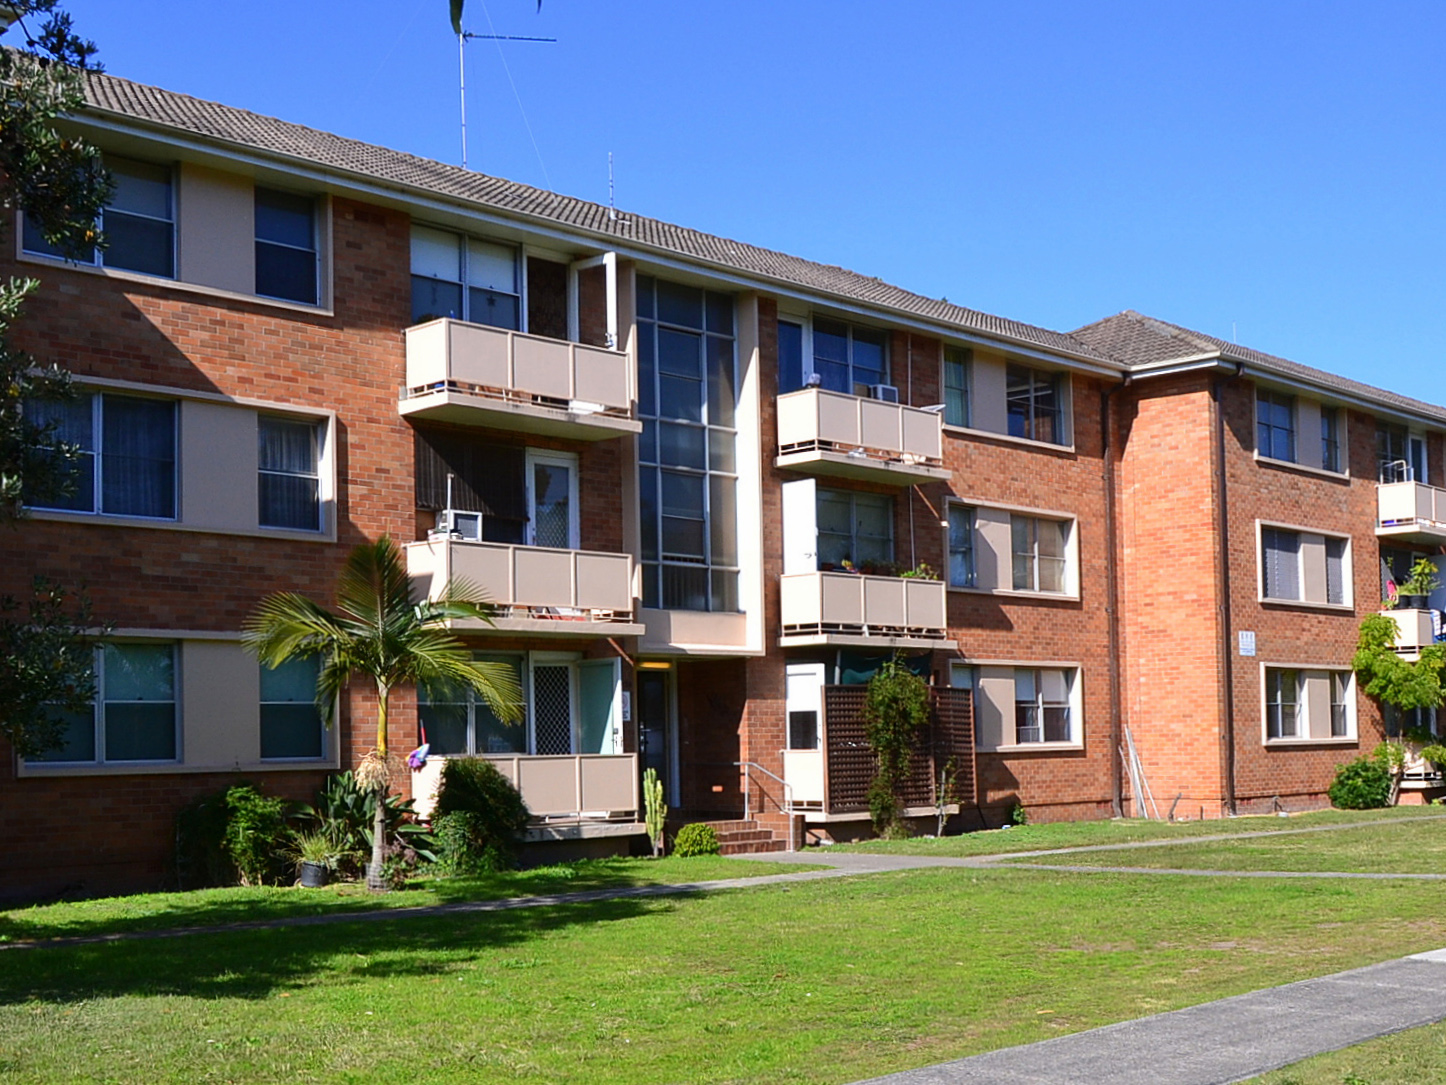 Public housing is in crisis across Australia. Public waiting list times continue to grow longer and longer as demand for public housing has risen well beyond capacity, with the situation only getting worse by the year. Image: rent.com.au
